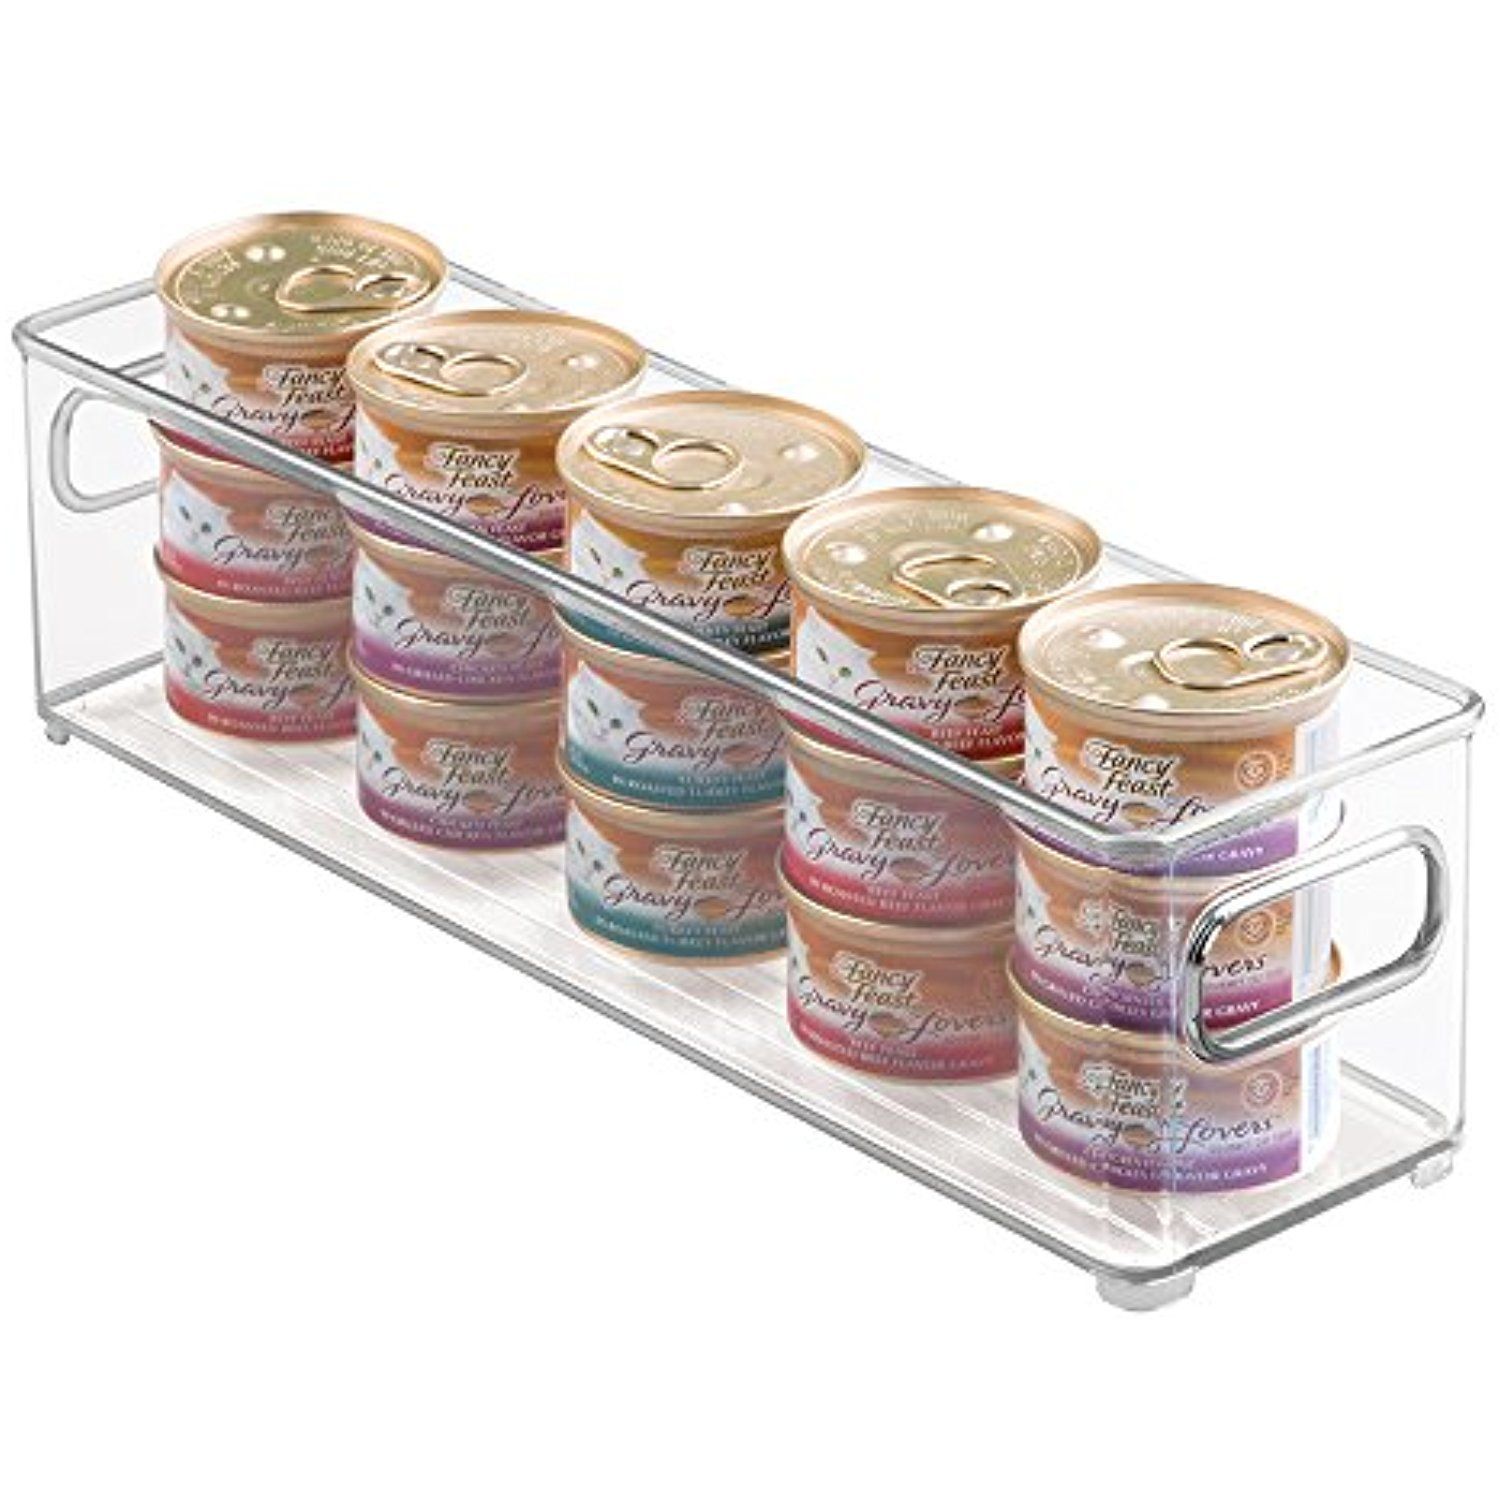 mDesign Canned Cat Food Organizer Bin for Pet Storage ...